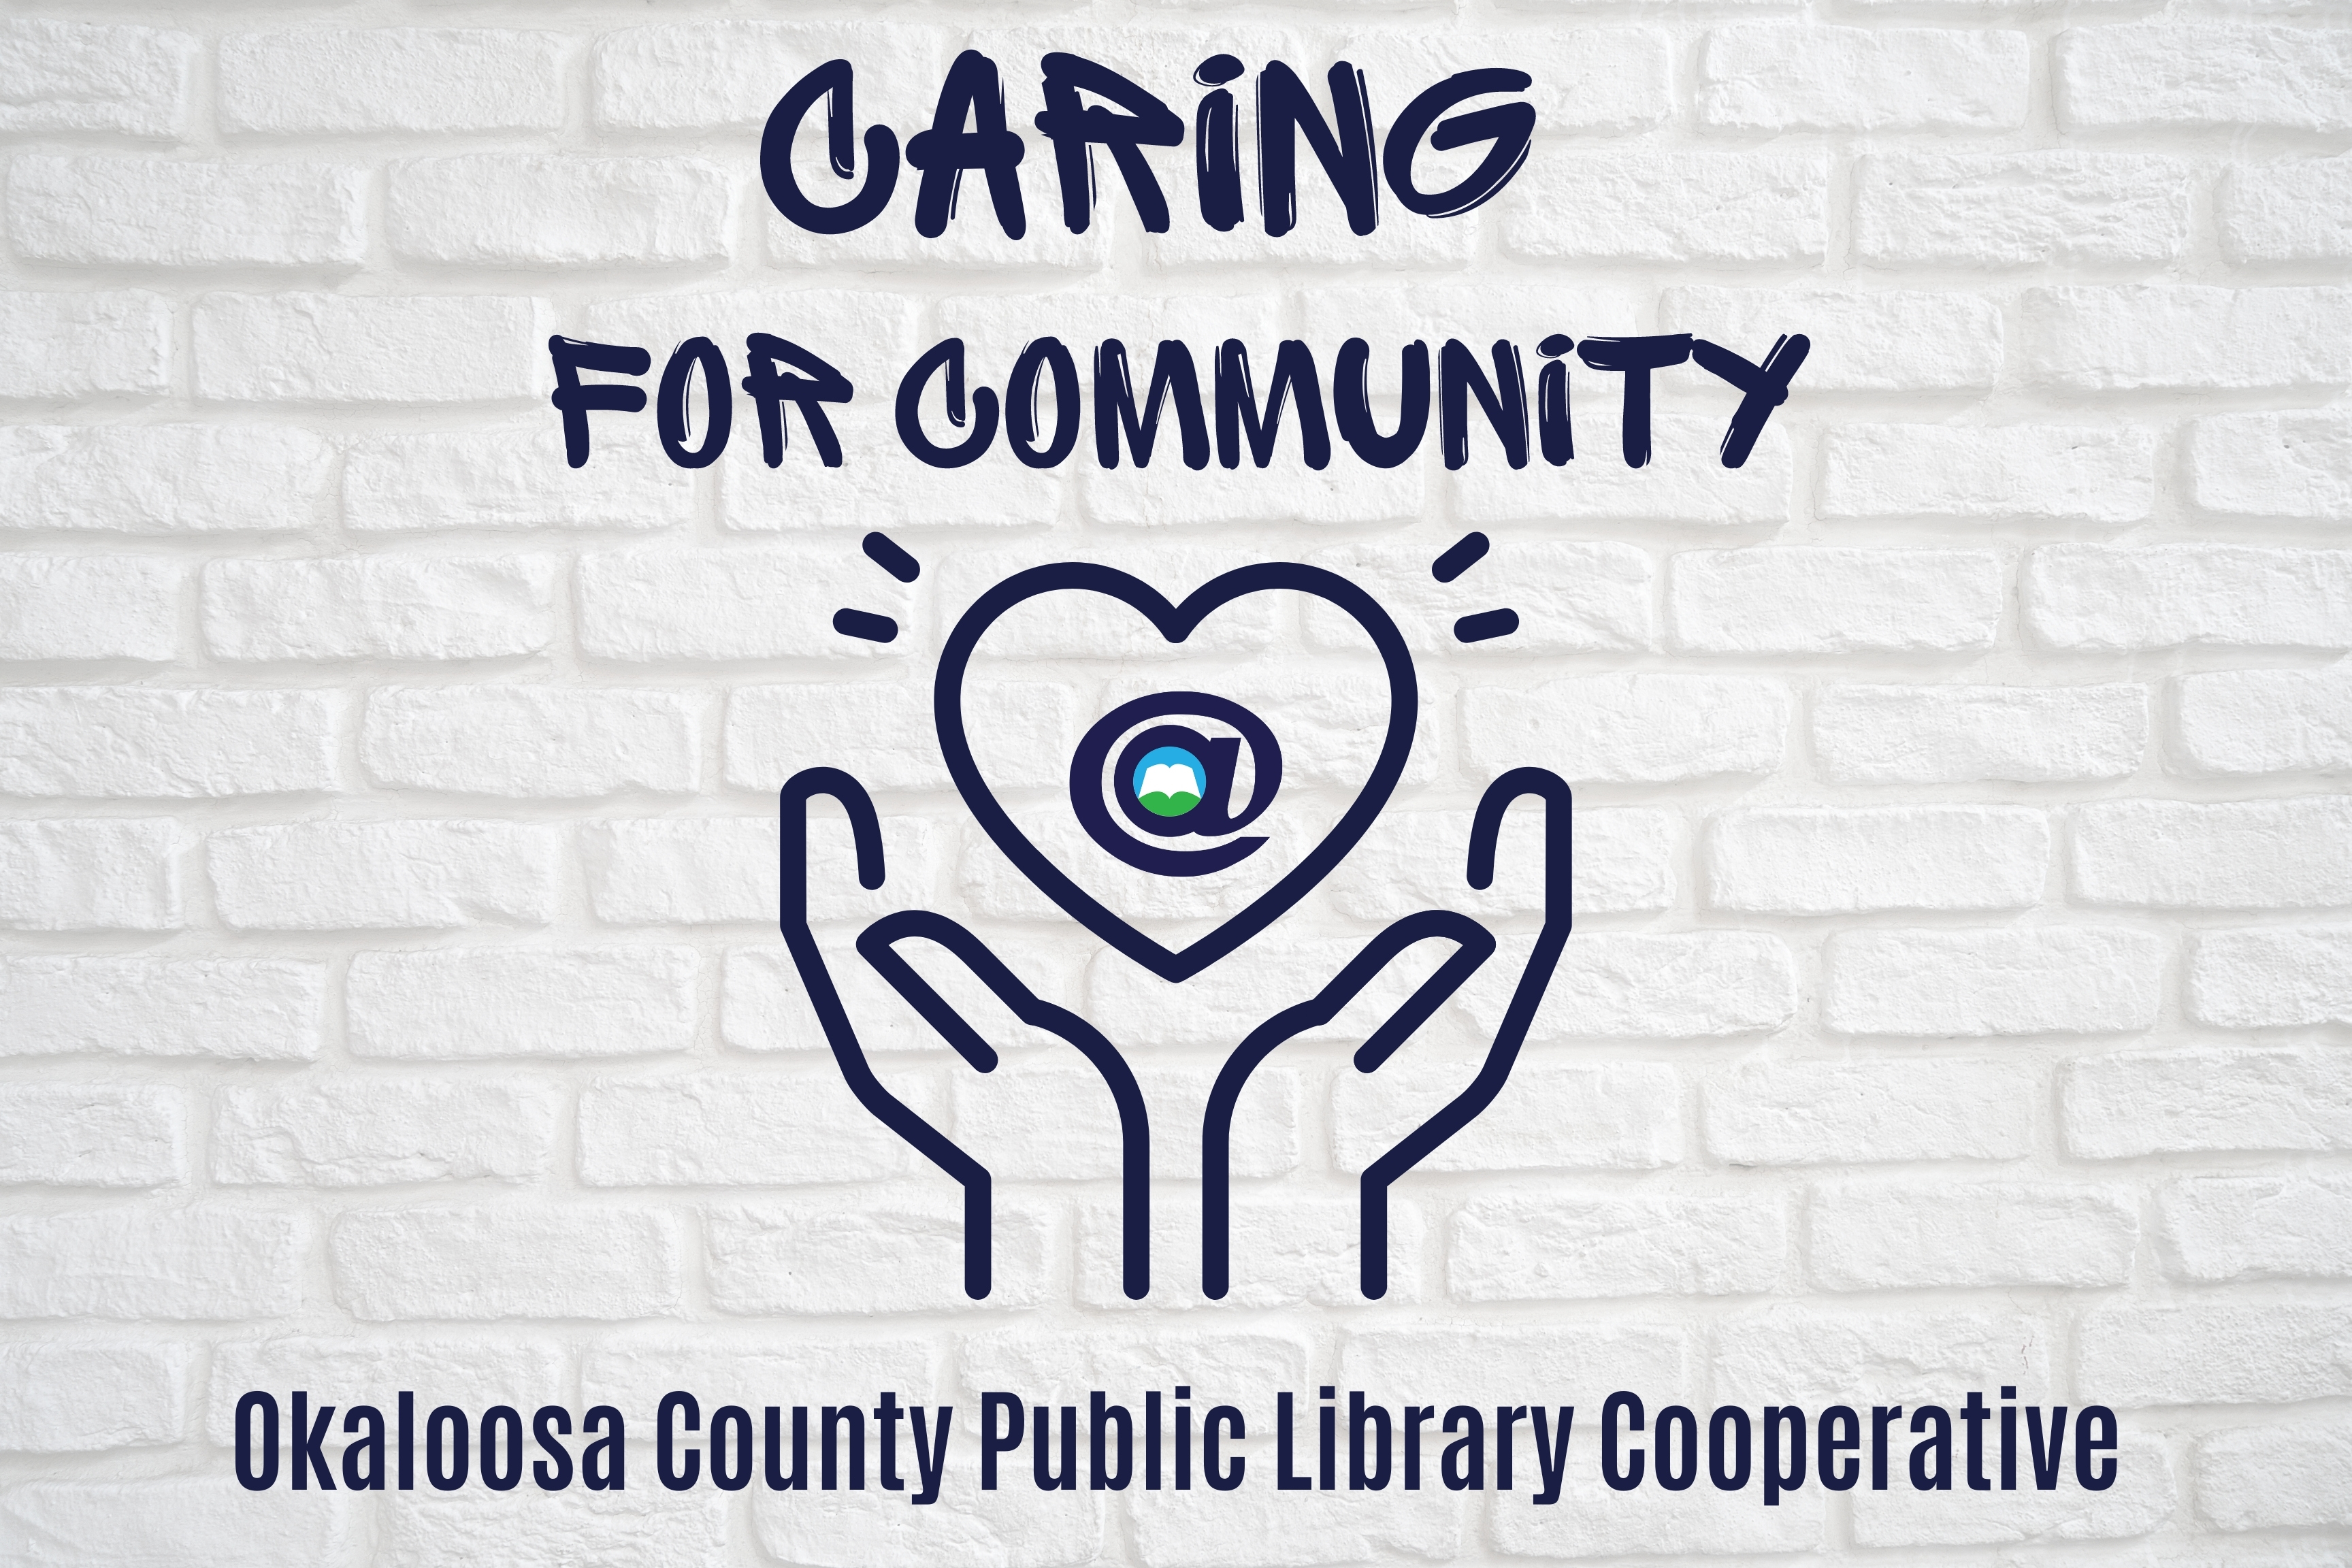 Caring for Community graphic